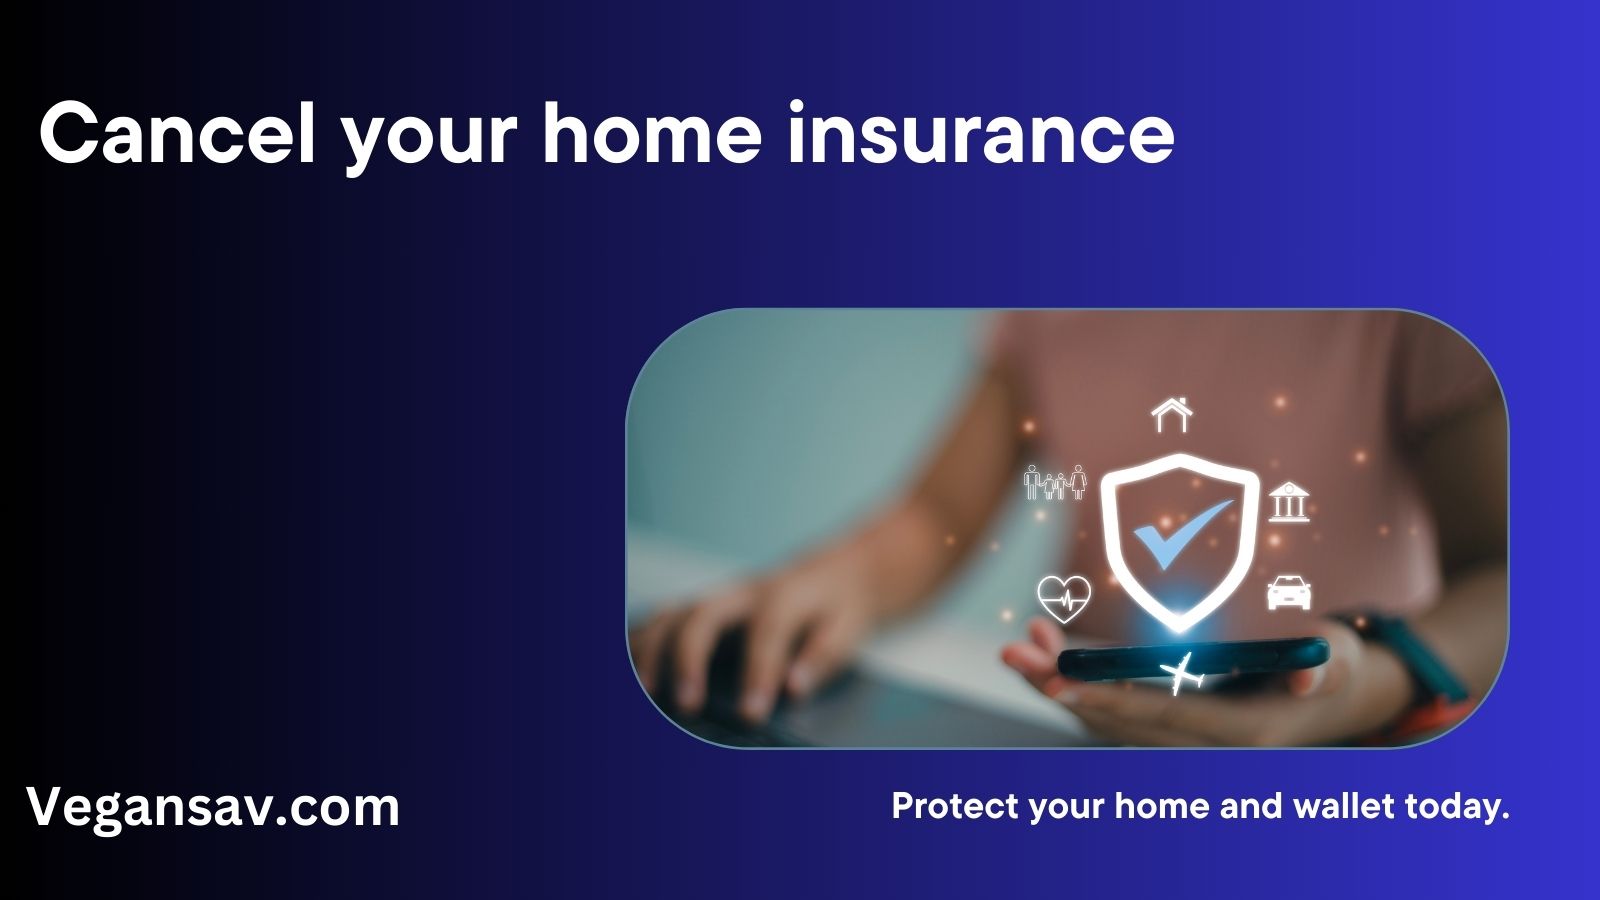 Cancel your home insurance